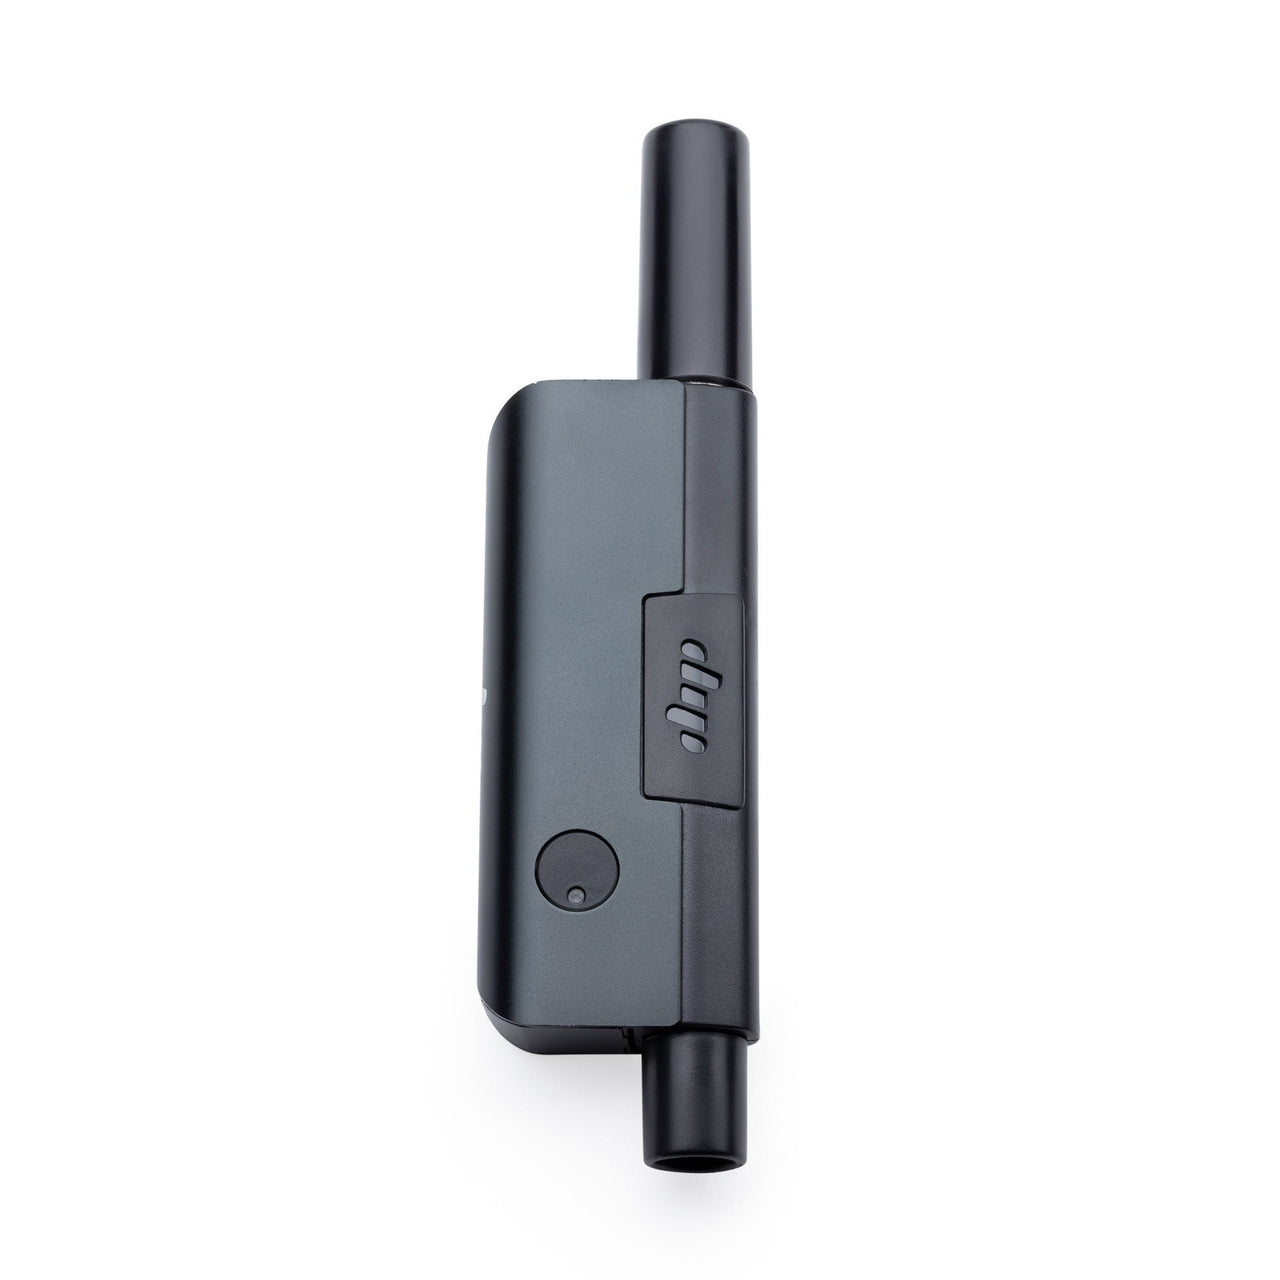 Dip Devices EVRI Three-In-One Vaporizer